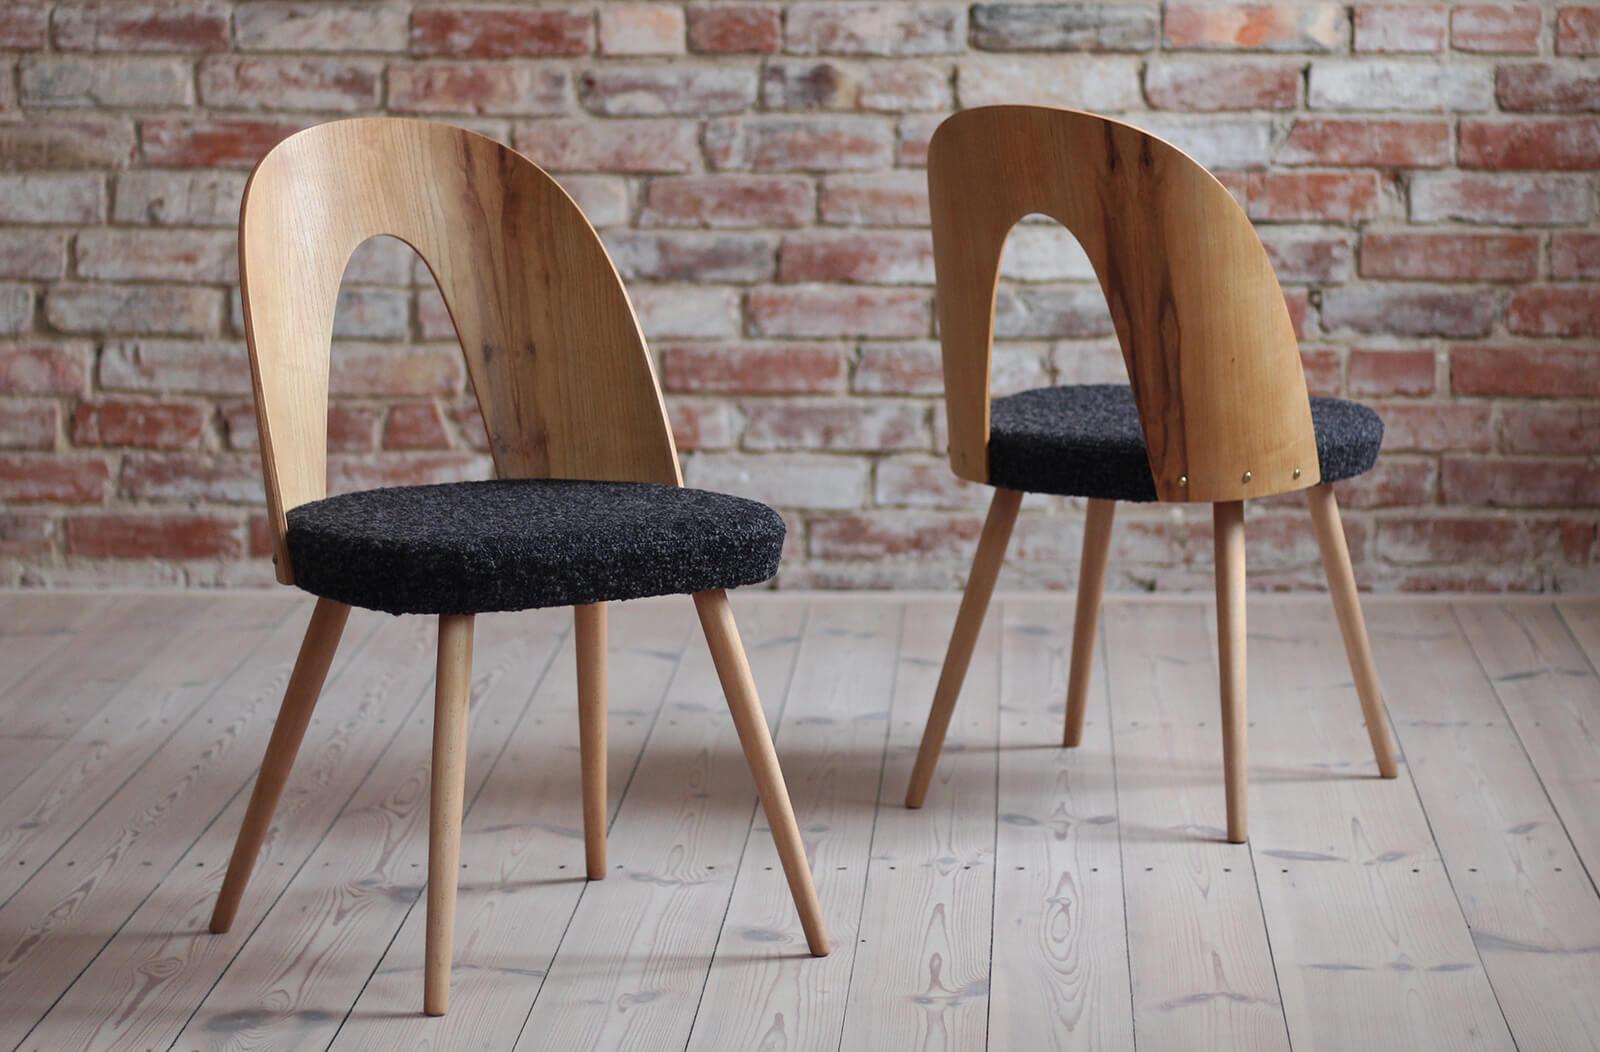 Set of 4 Mid-Century Dining Chairs by a. Šuman, Reupholstered in Black Boucle In Good Condition In Wrocław, Poland